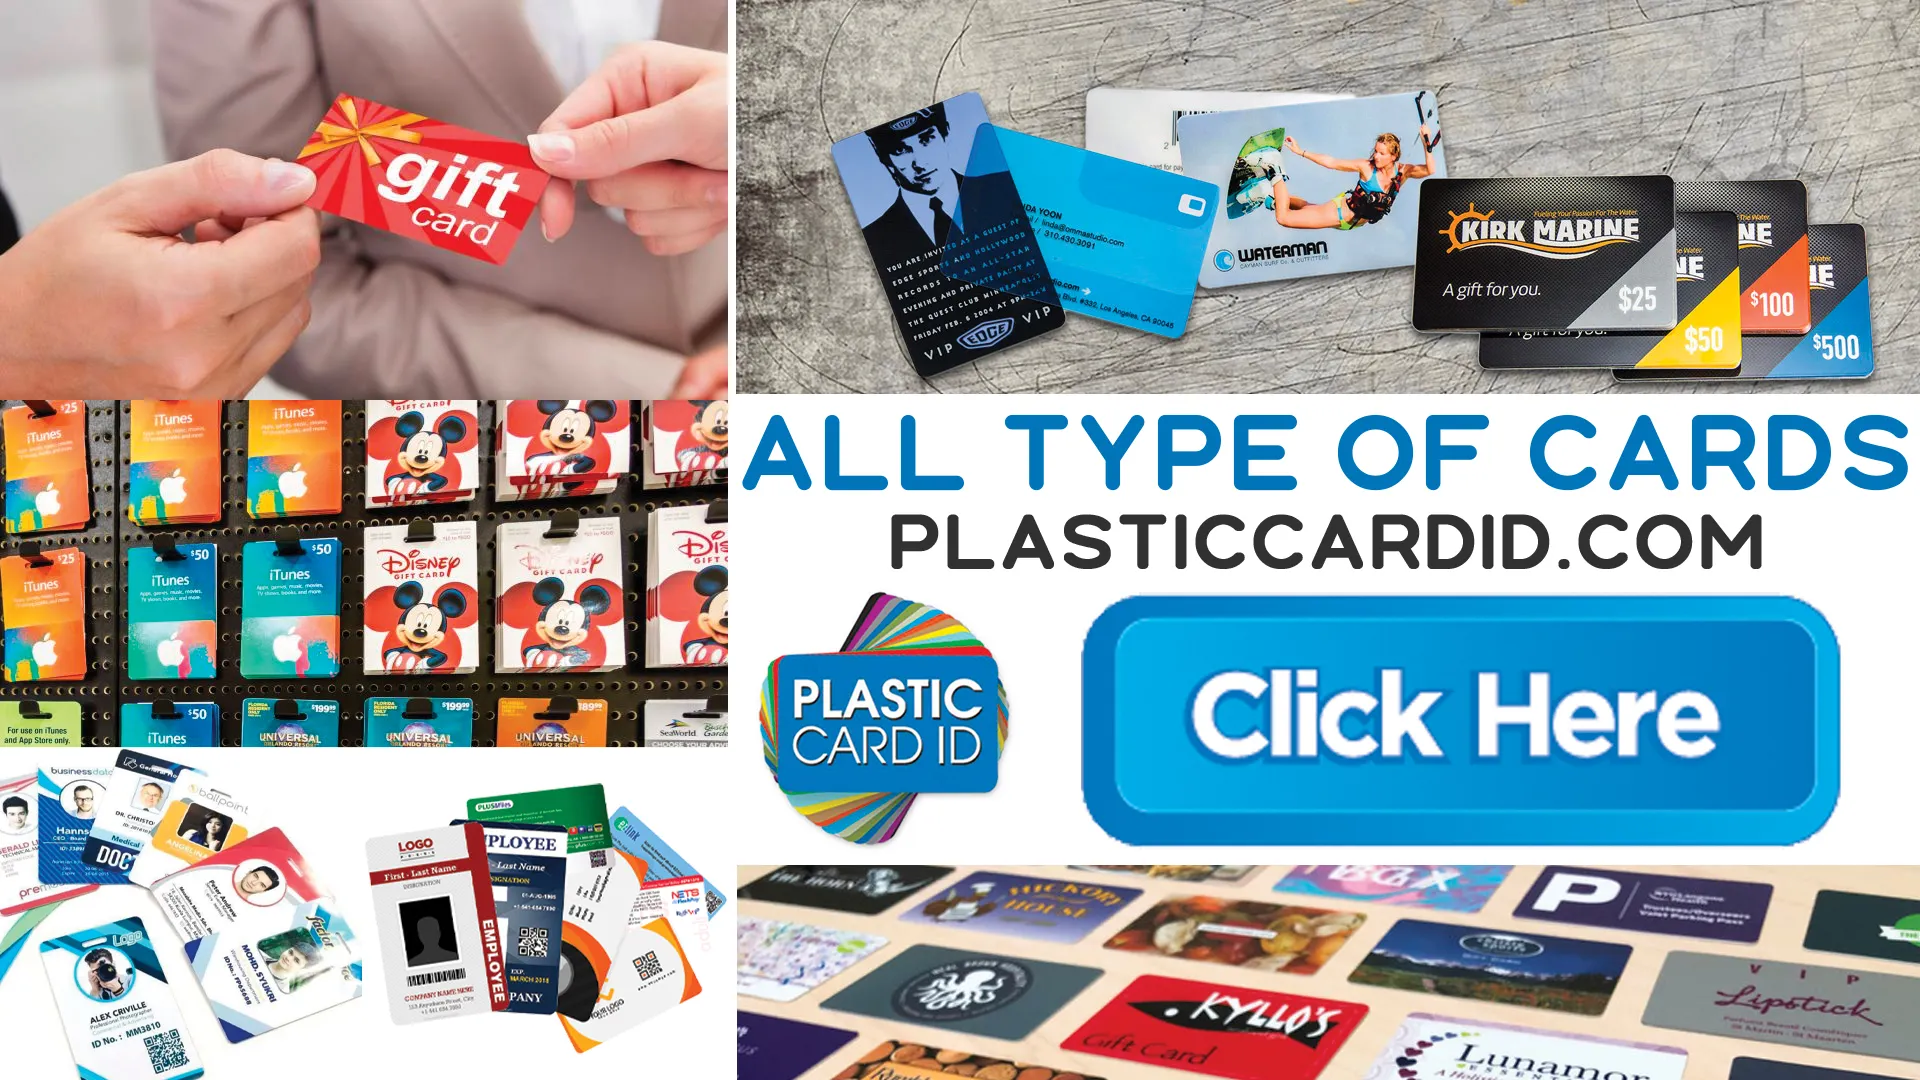 The Journey to Your Perfect Plastic Card Begins Here